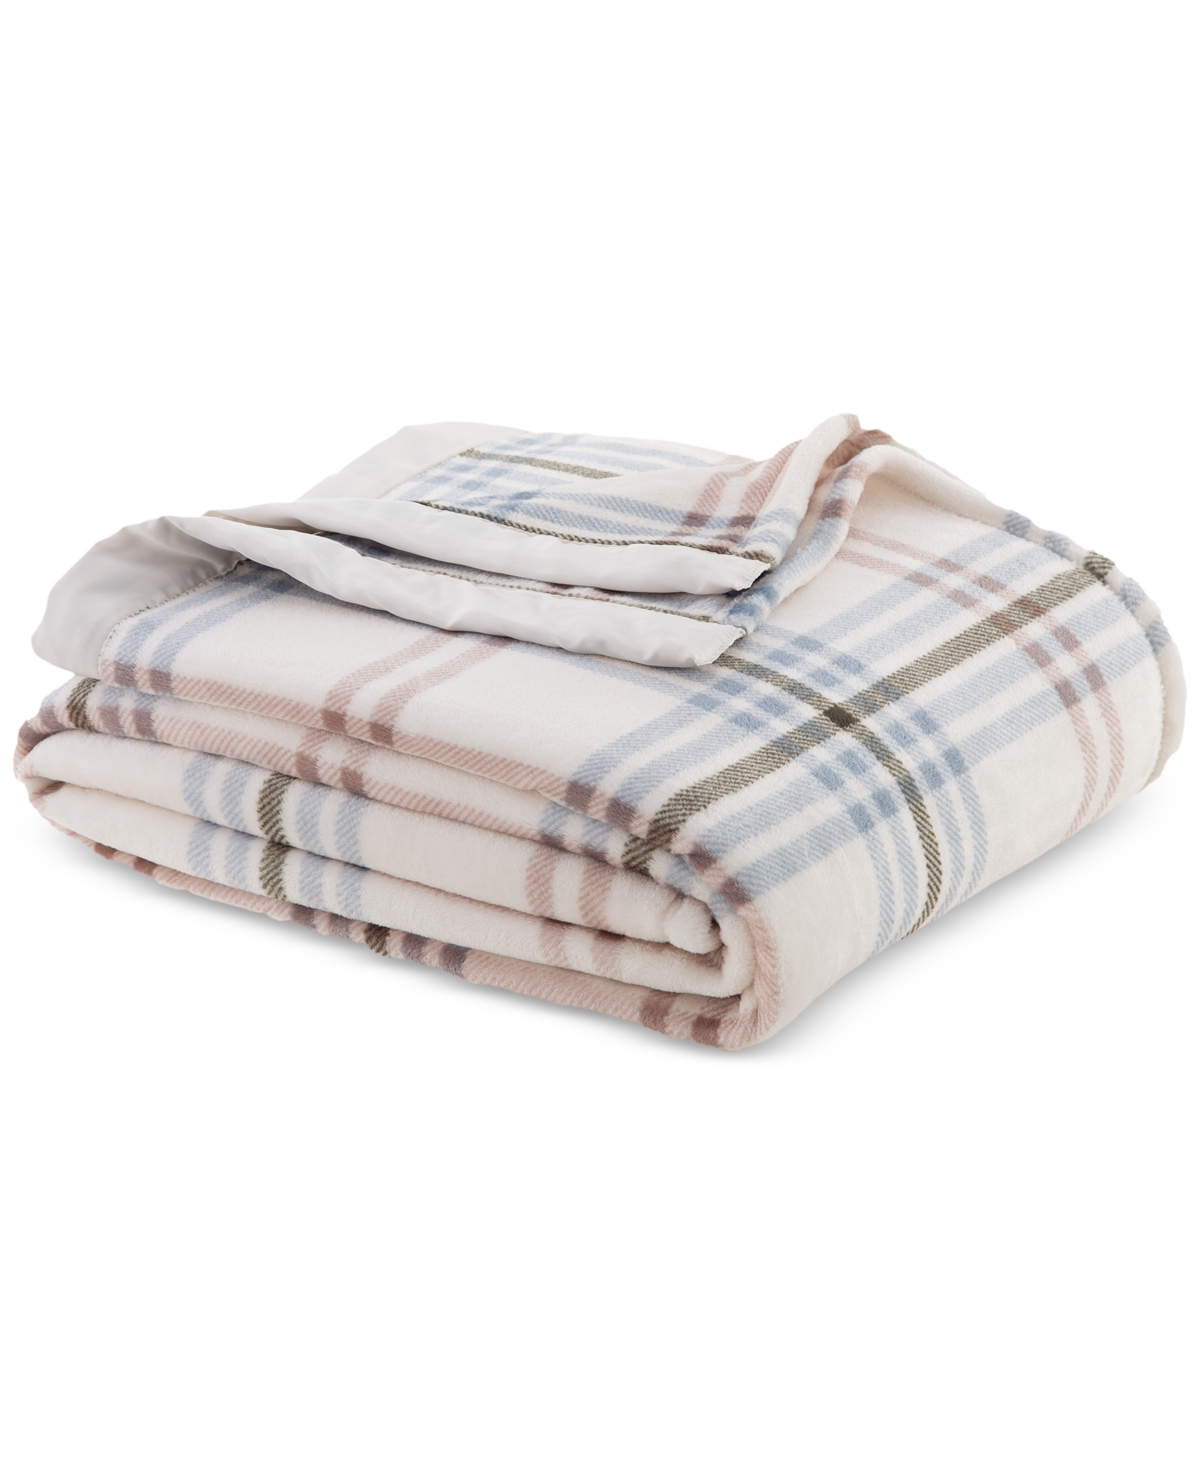 Berkshire Classic Velvety Plush Blanket, Twin, Created For Macy's In Blue Plaid